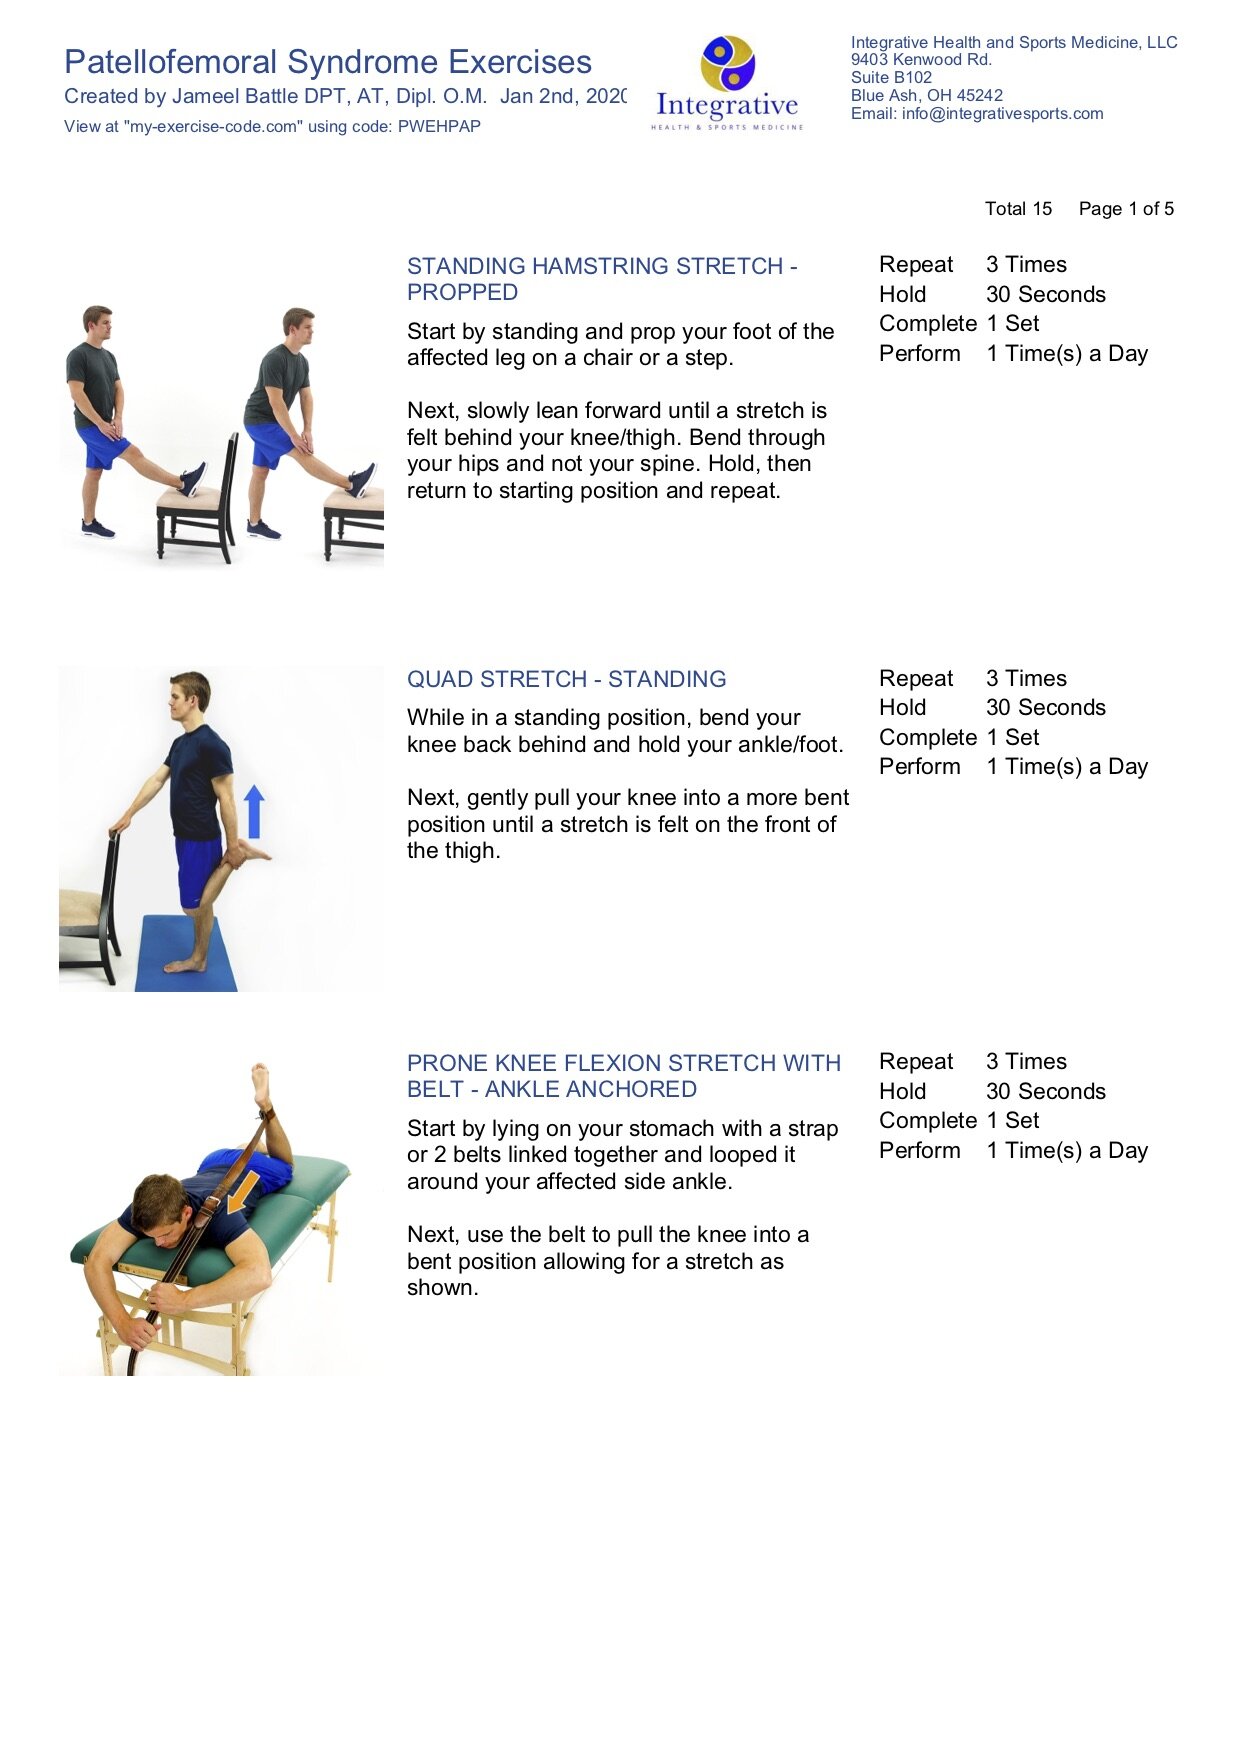 Home Exercise Program for Patellofemoral Pain Syndrome — Integrative ...